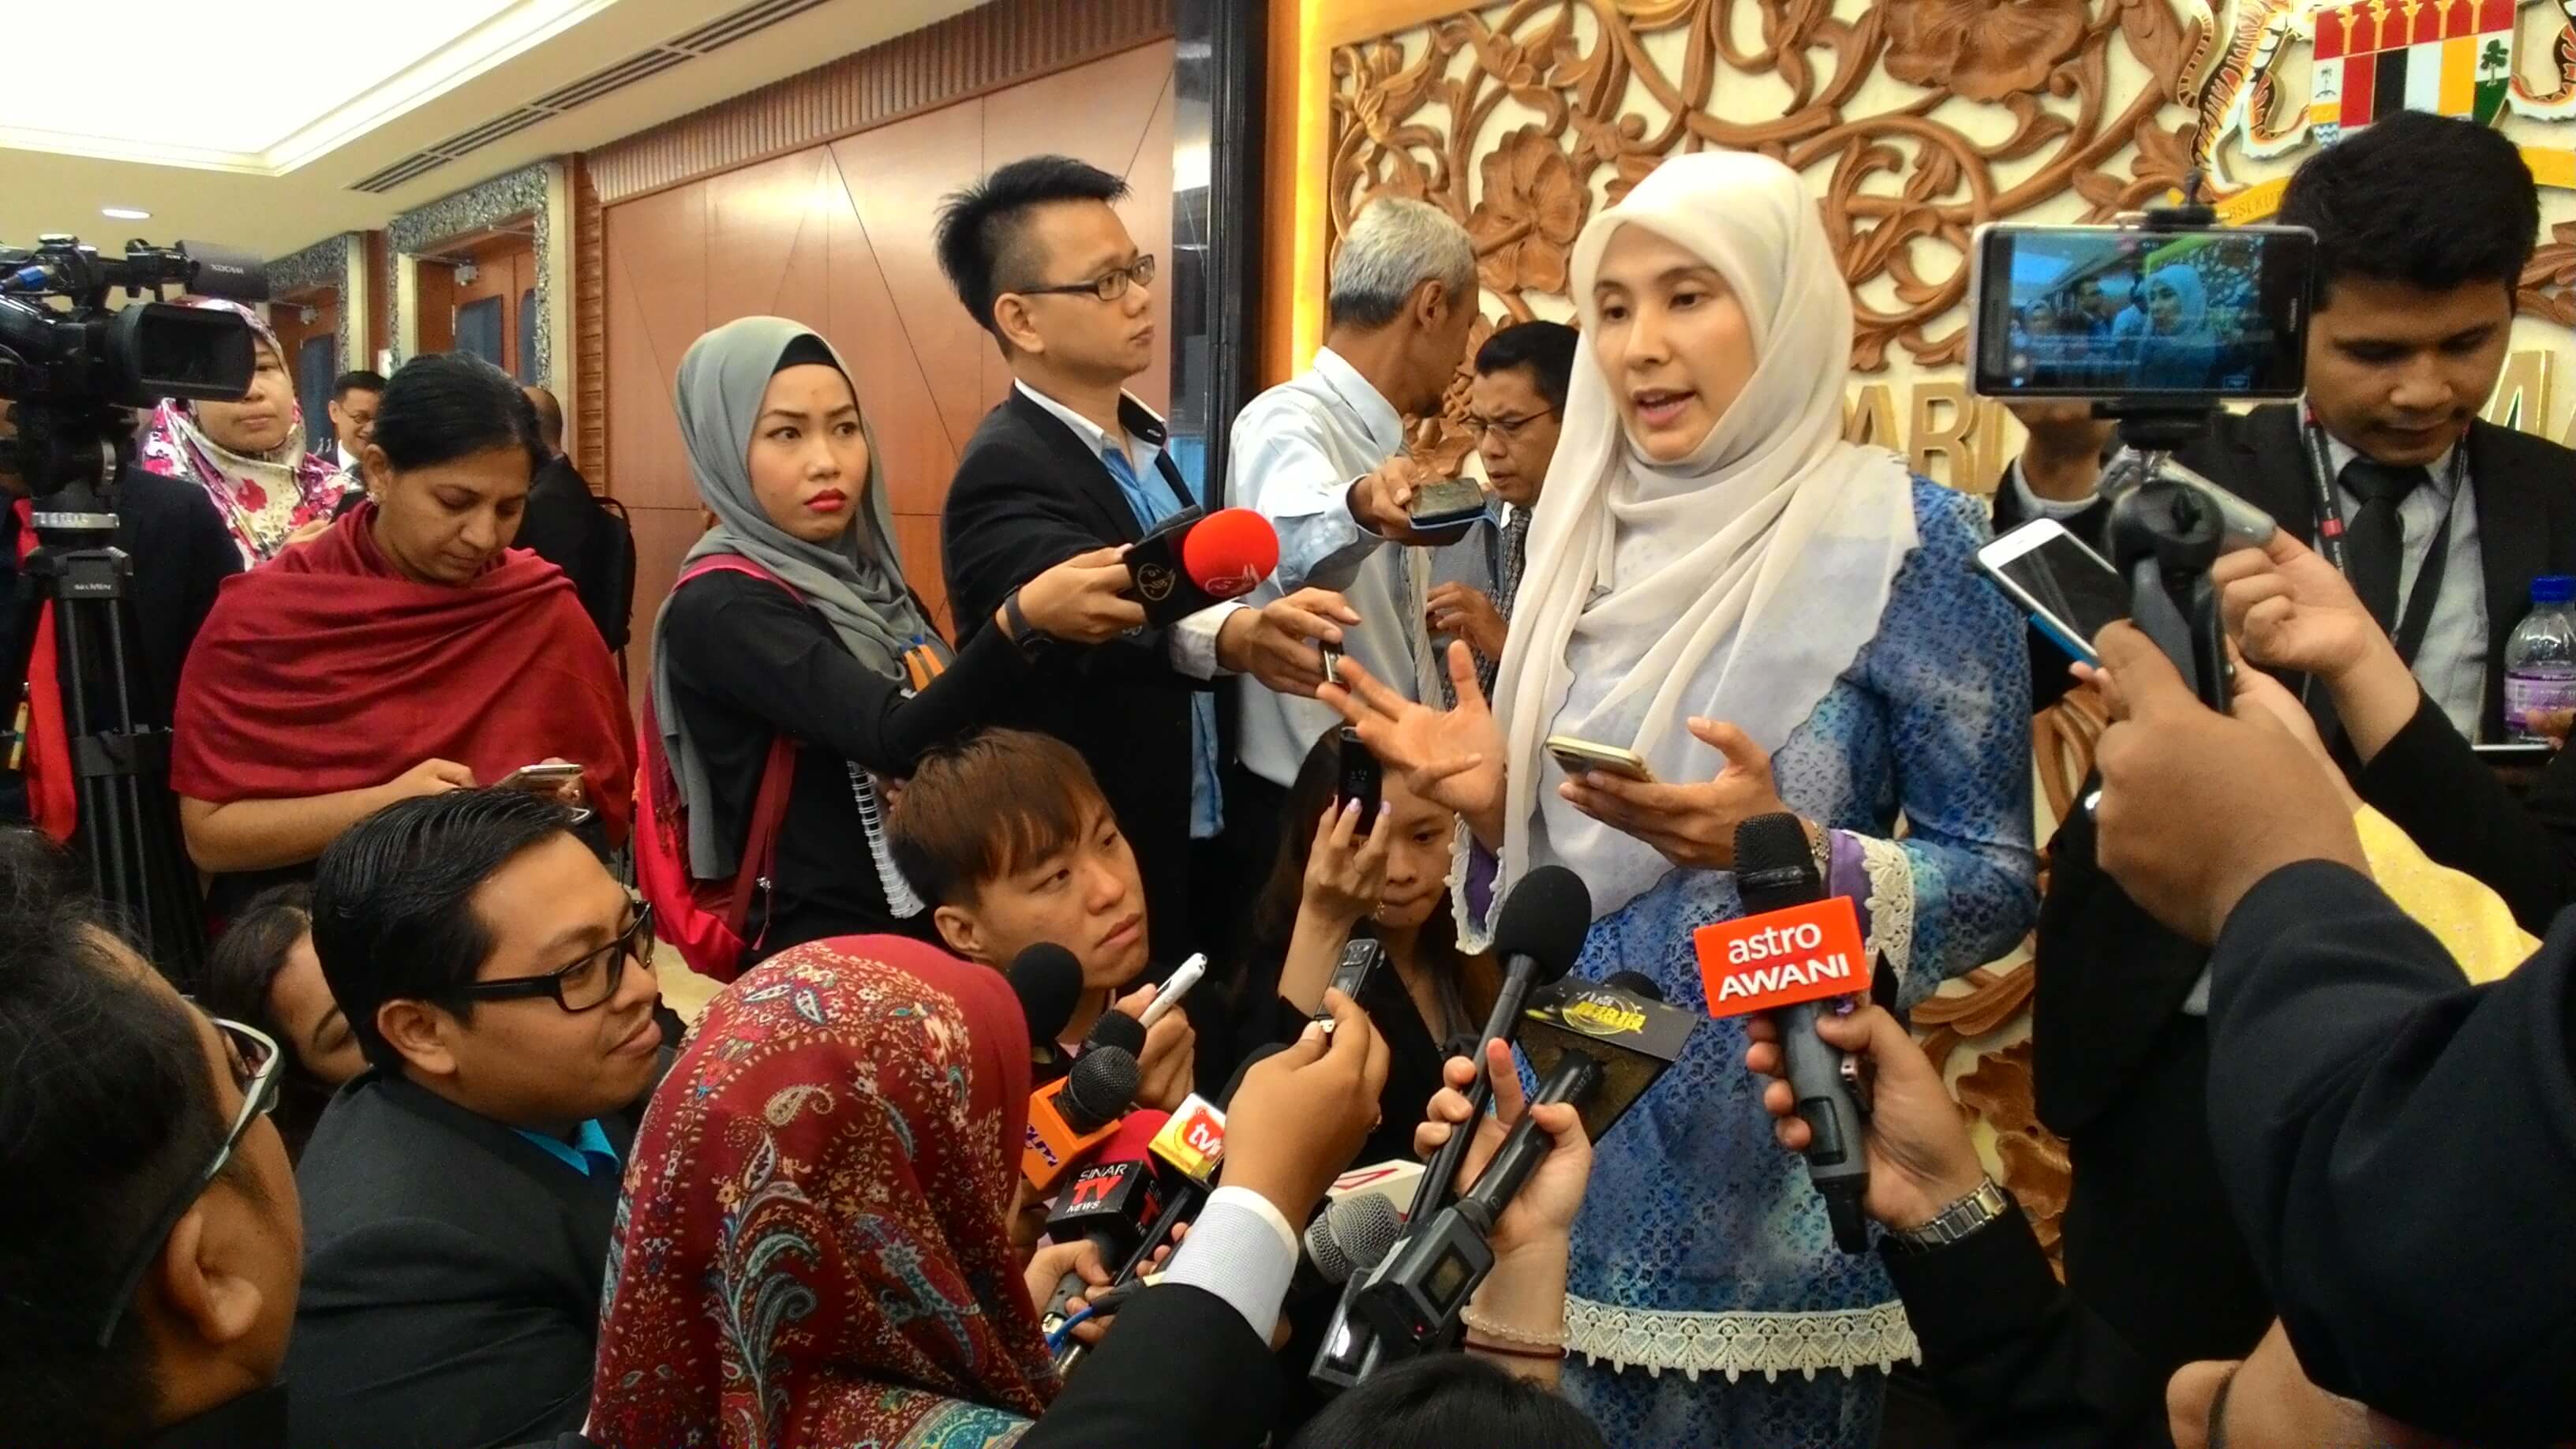 The Speaker’s Decision to Block Journalists at Parliament Lobby is Disgraceful